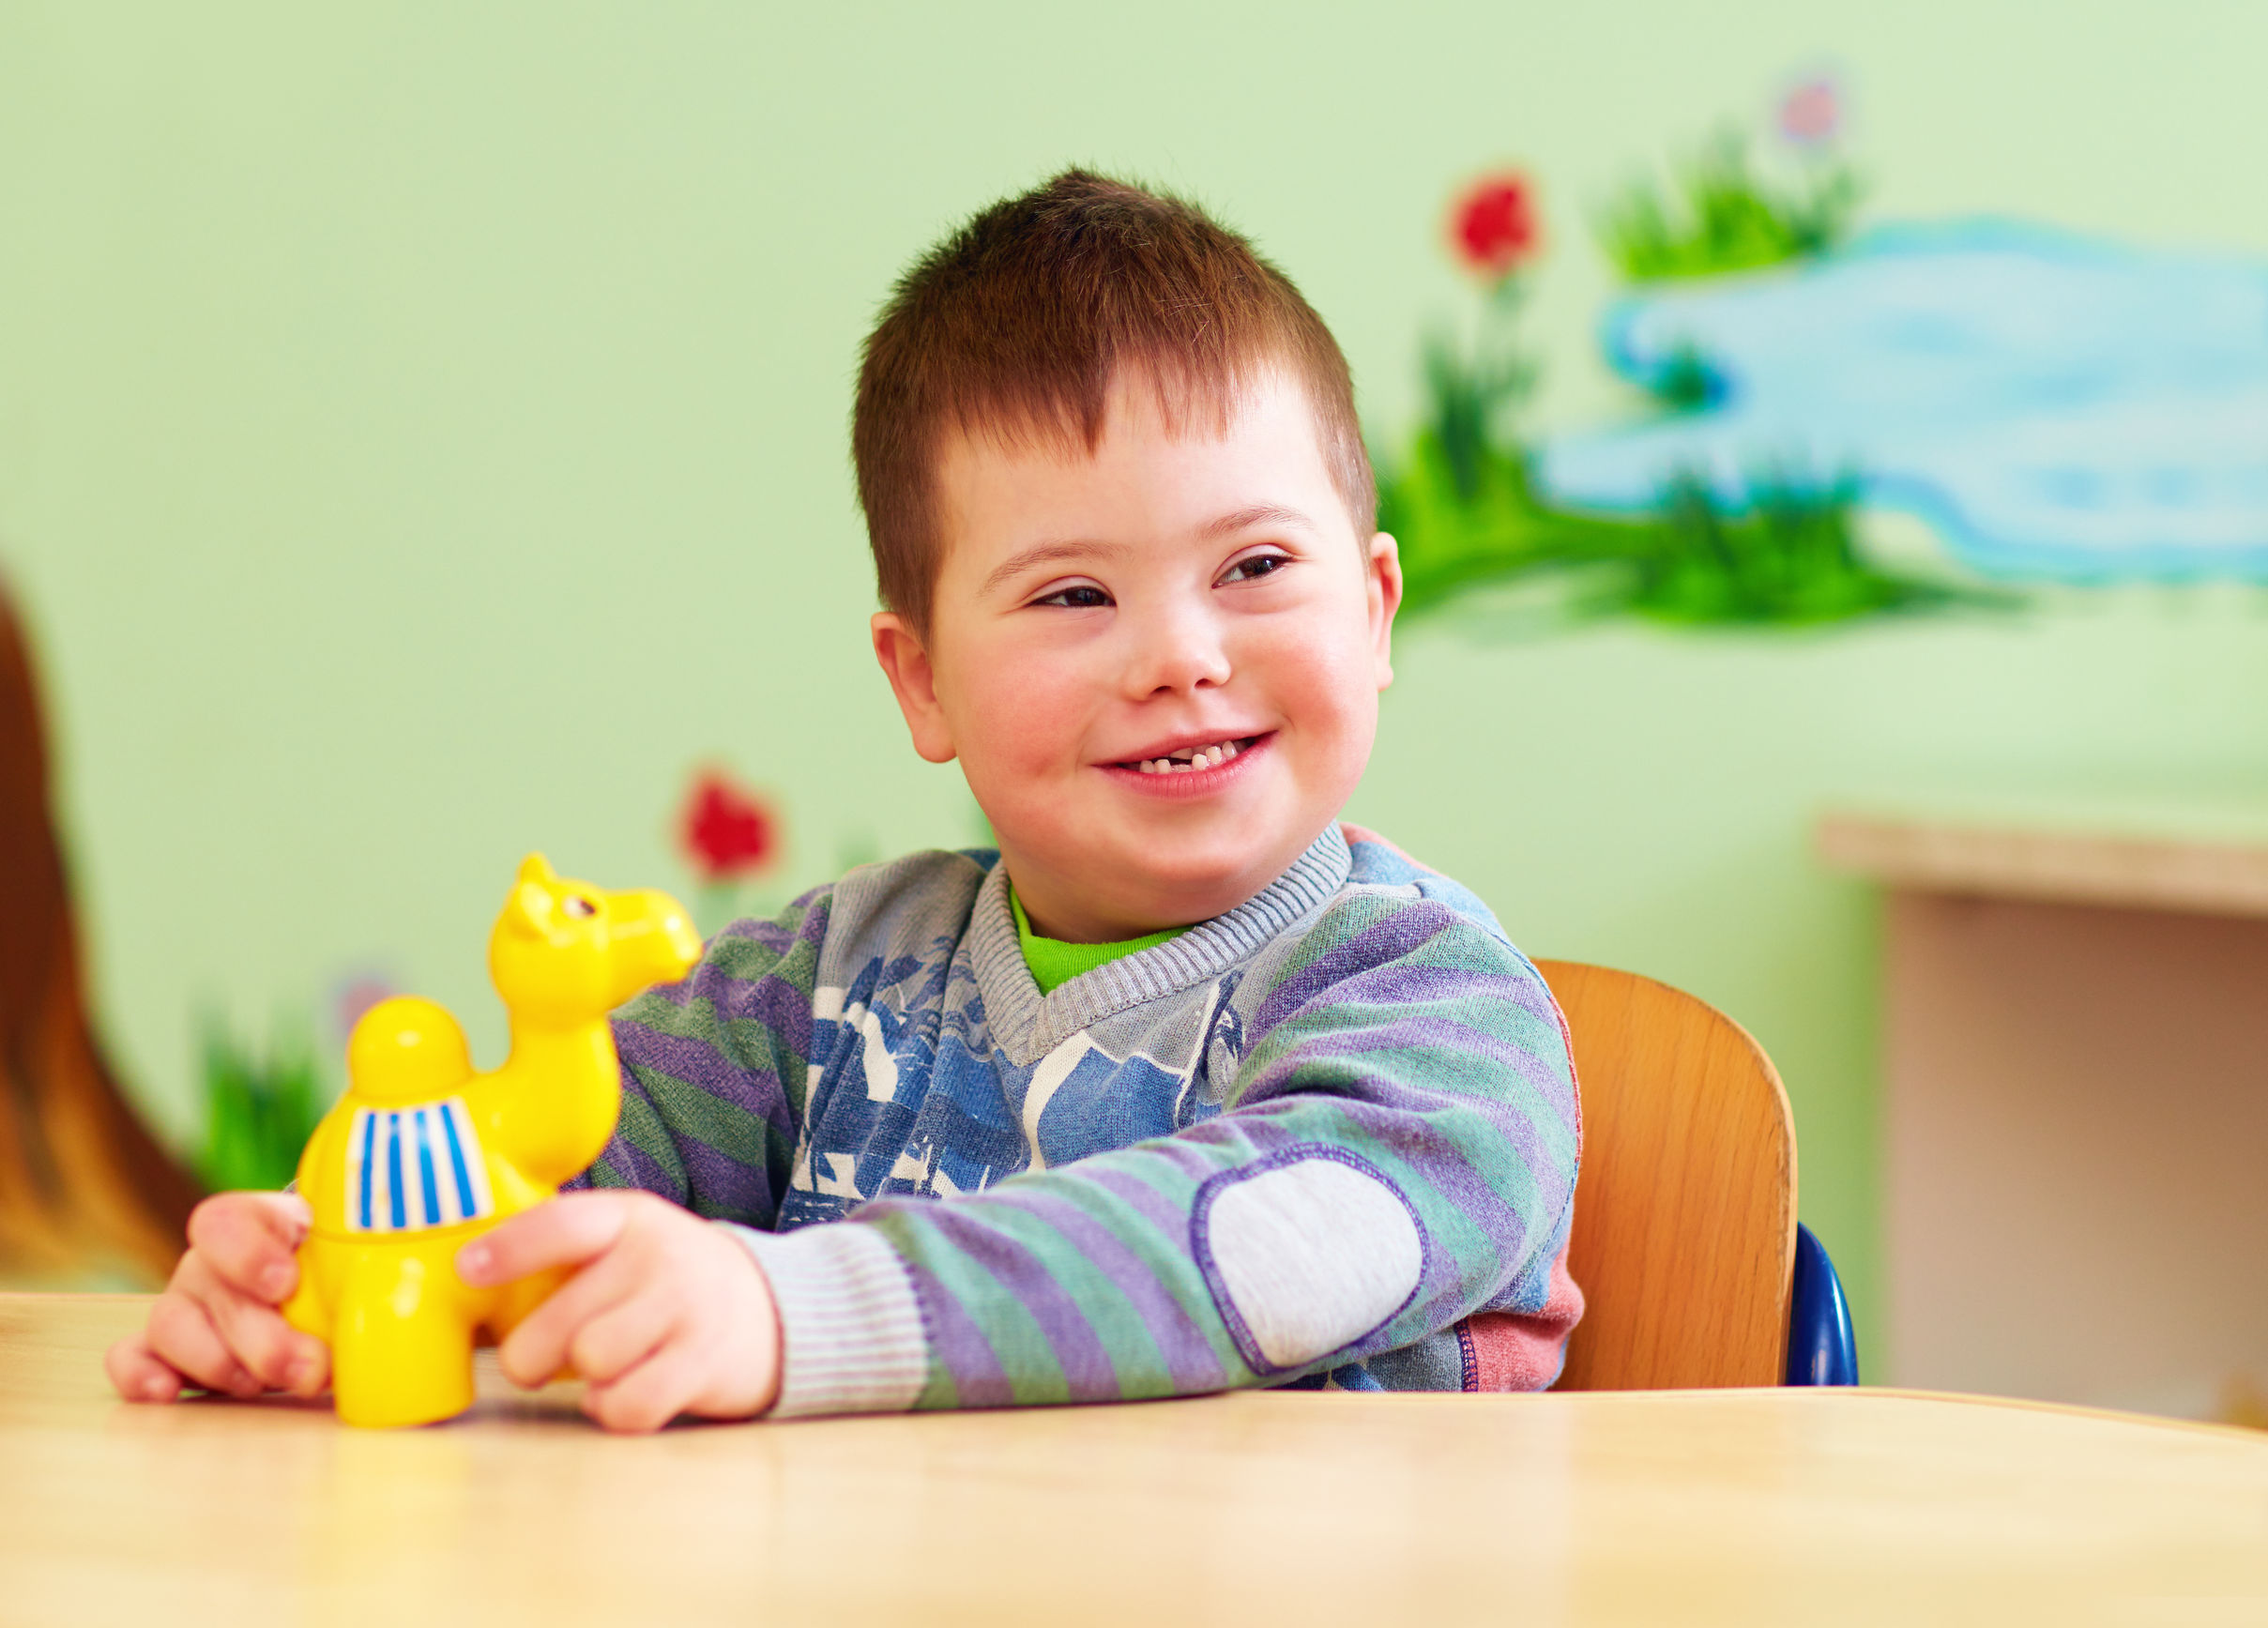 Child with Down Syndrome in kindergarten